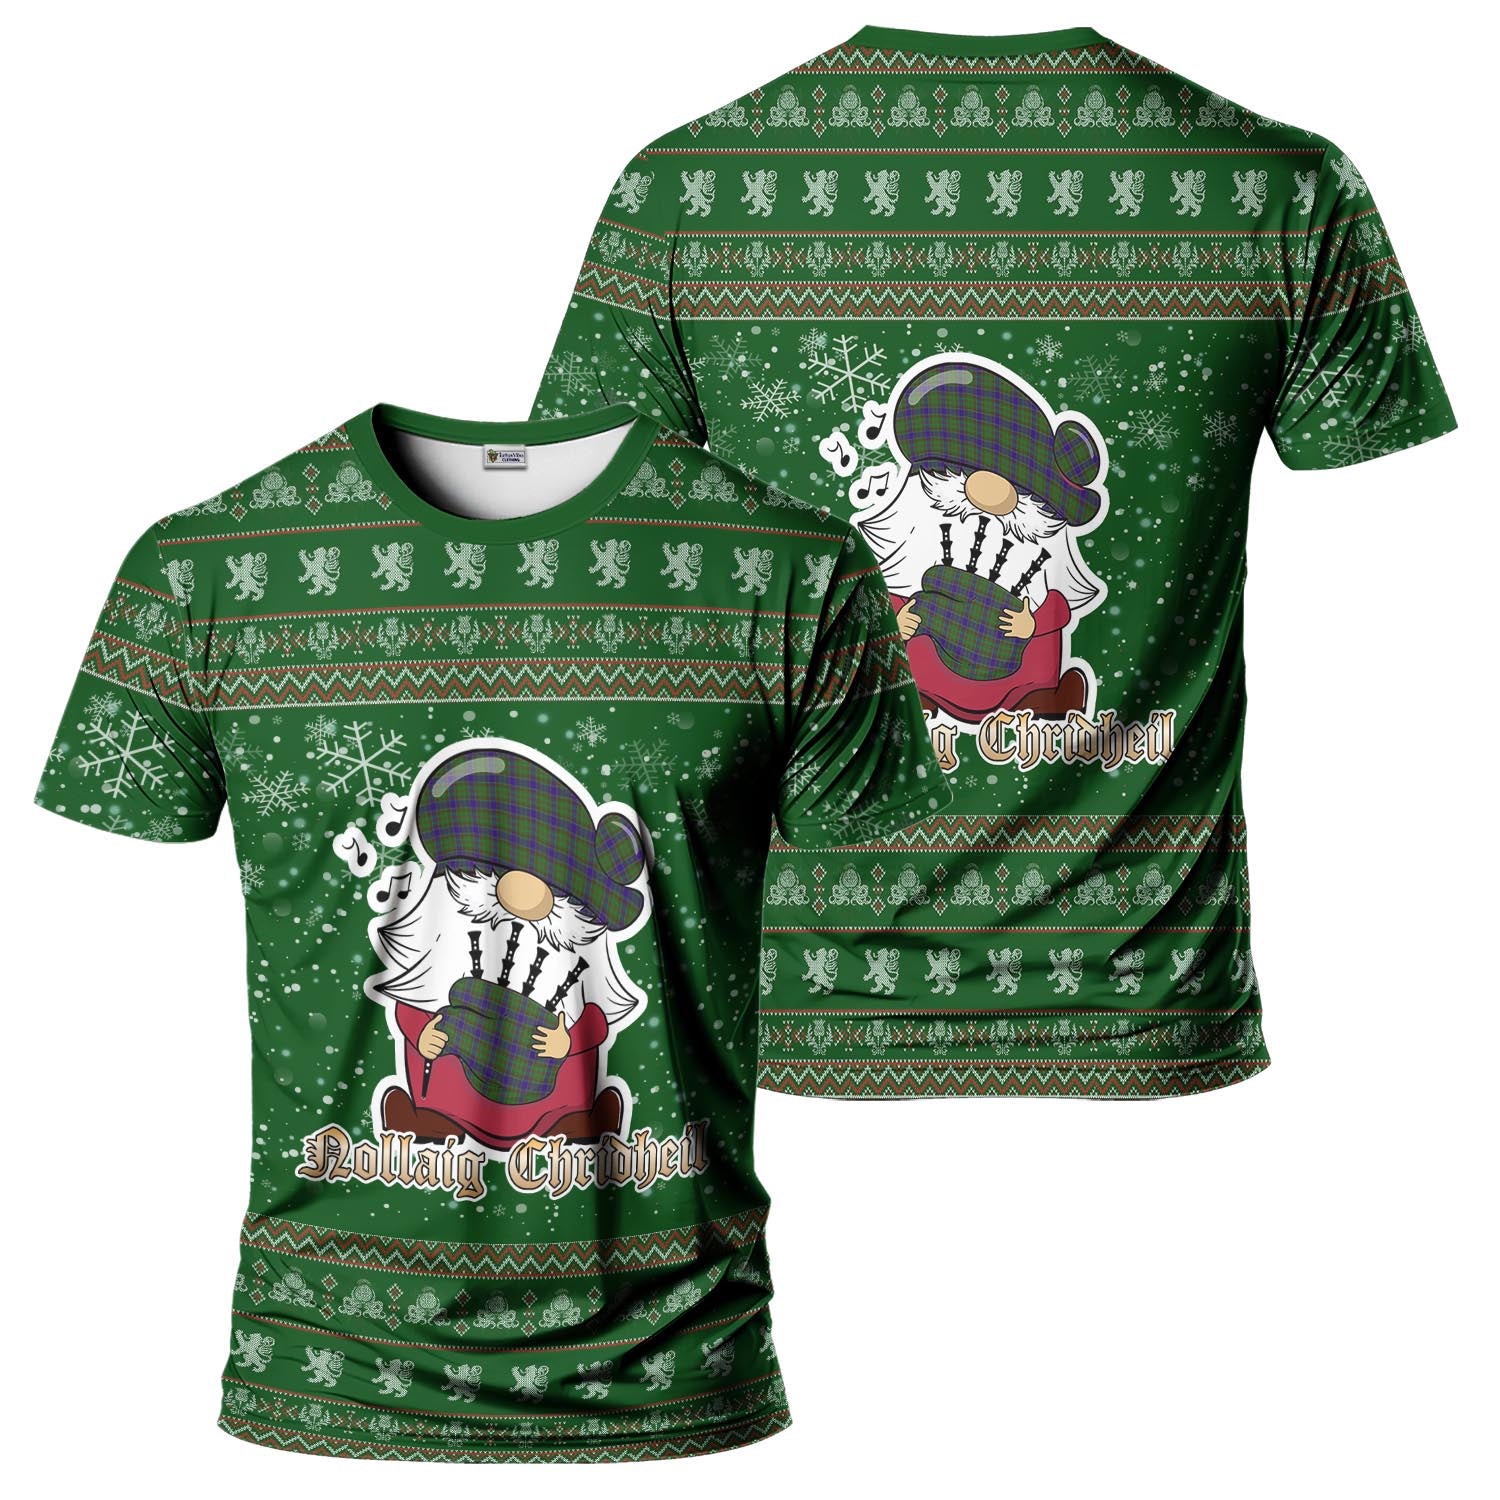 Adam Clan Christmas Family T-Shirt with Funny Gnome Playing Bagpipes Men's Shirt Green - Tartanvibesclothing